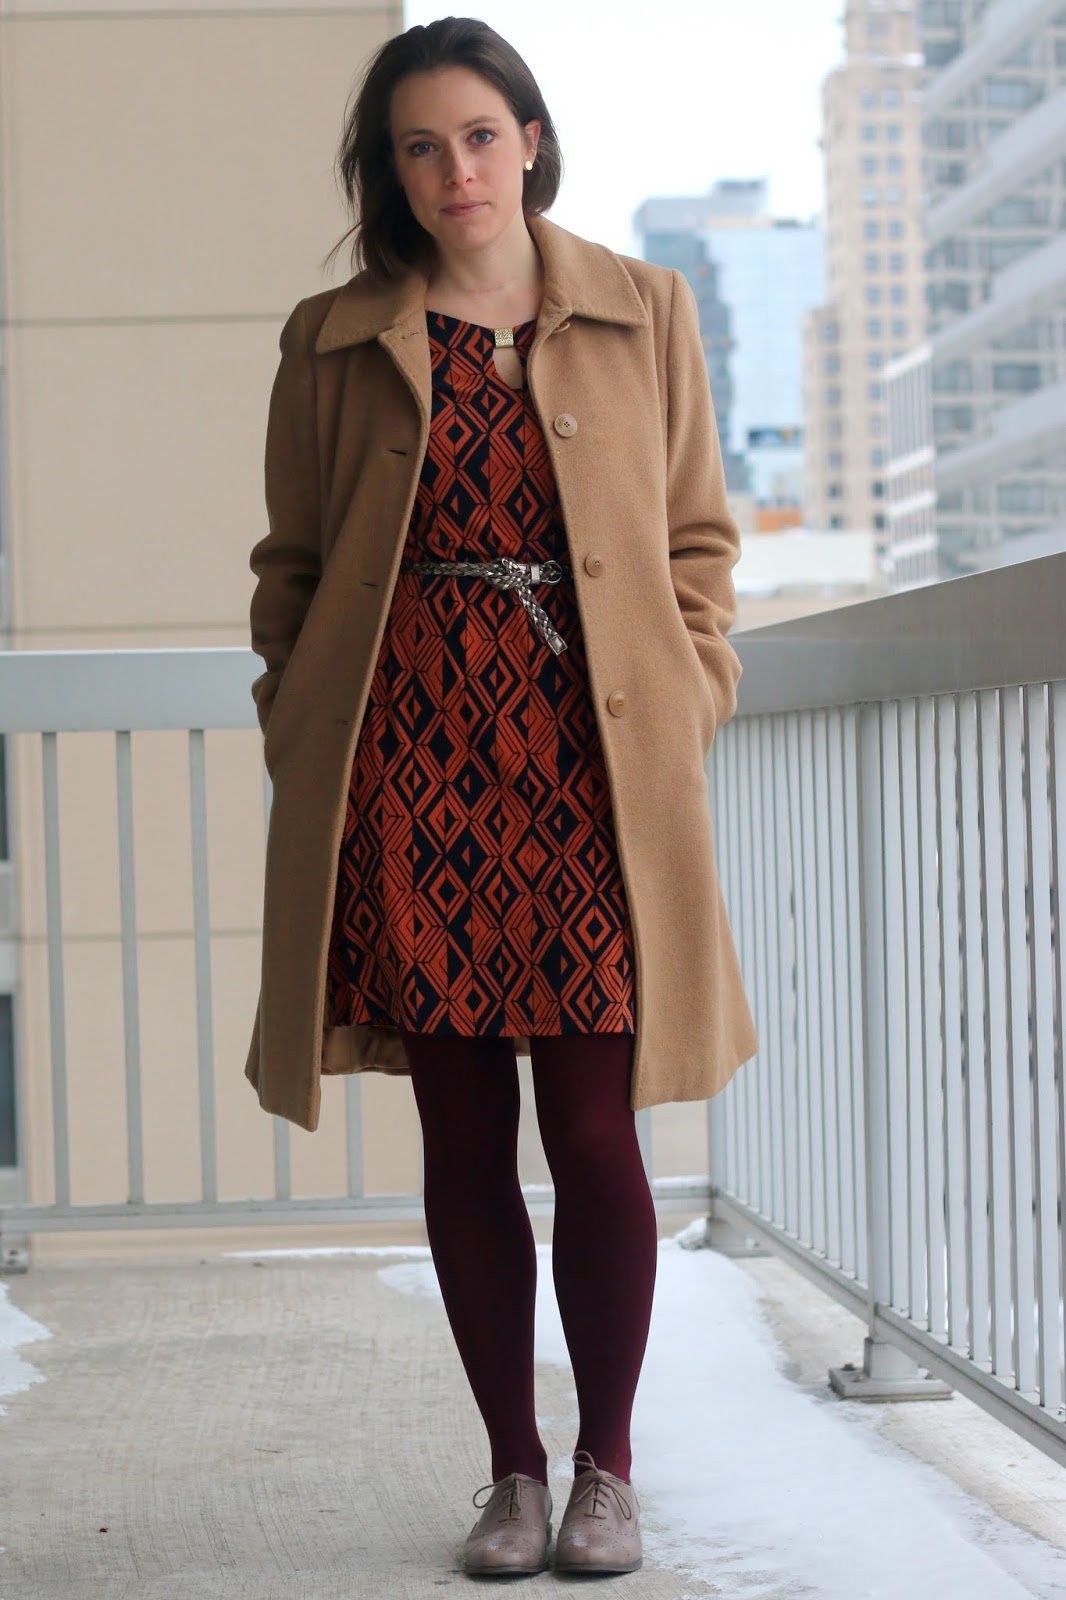 FashionablyEmployed.com | Orange and Navy geometric pattern dress, burgundy tights, gray belt and oxfords, camel winter coat | wear to work outfit, office style | versatile wardrobe workhorses